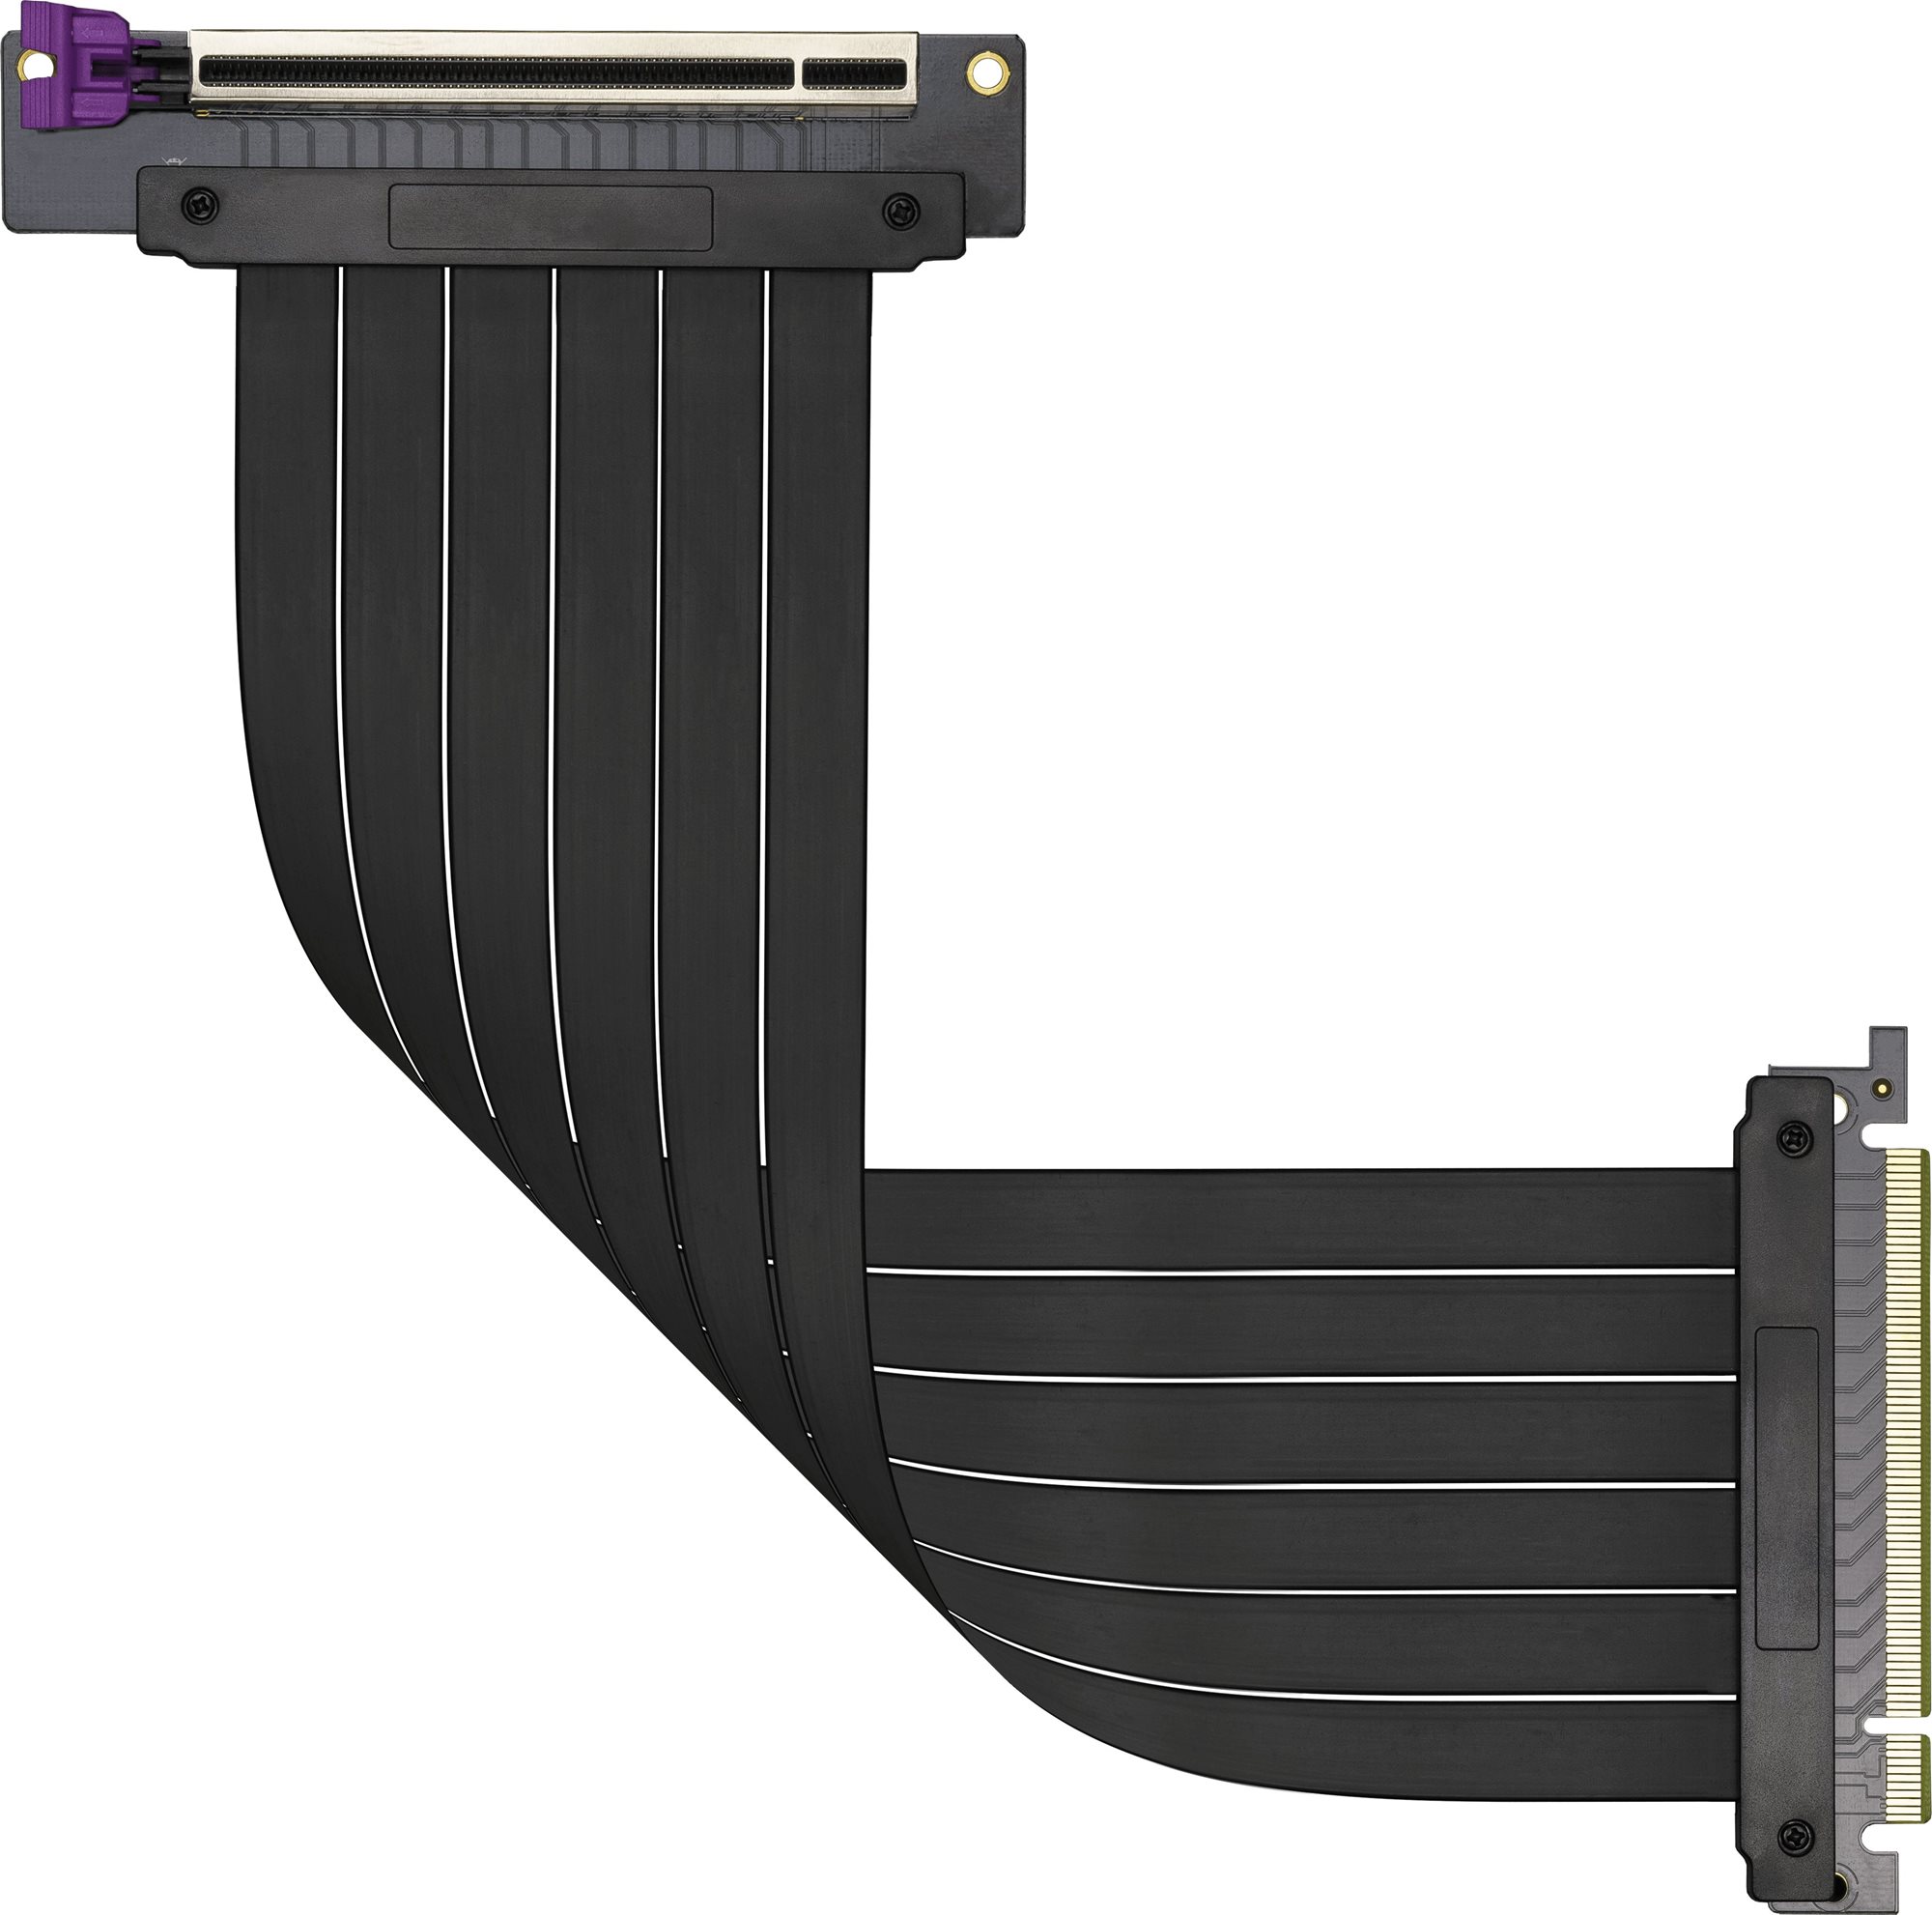 Cooler Master Riser Cable PCIe 3.0 x16 Ver. 2 - 300mm